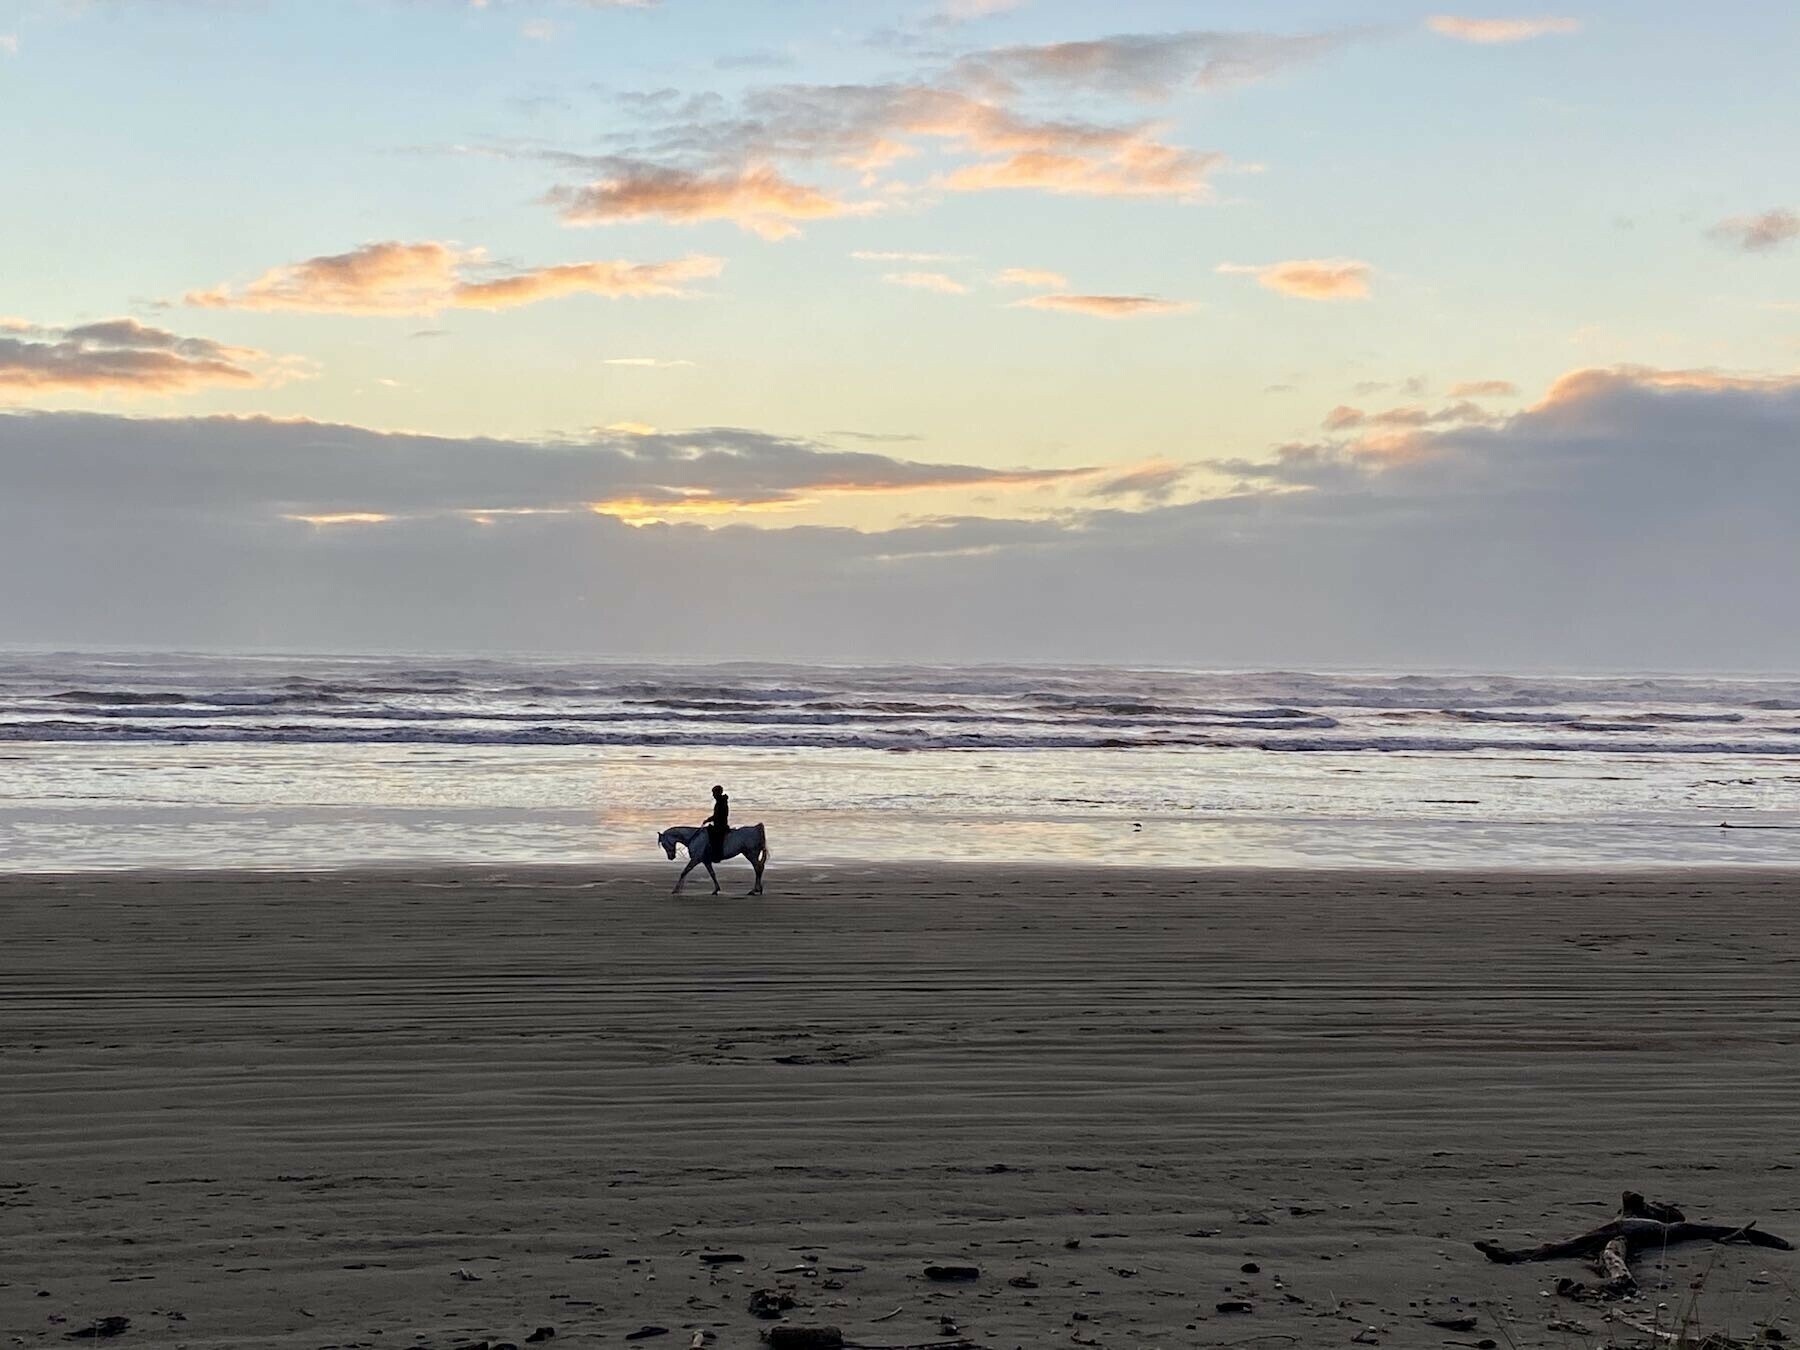 Horse and rider at the edge of the sea, with setting sun reflections on the water. 